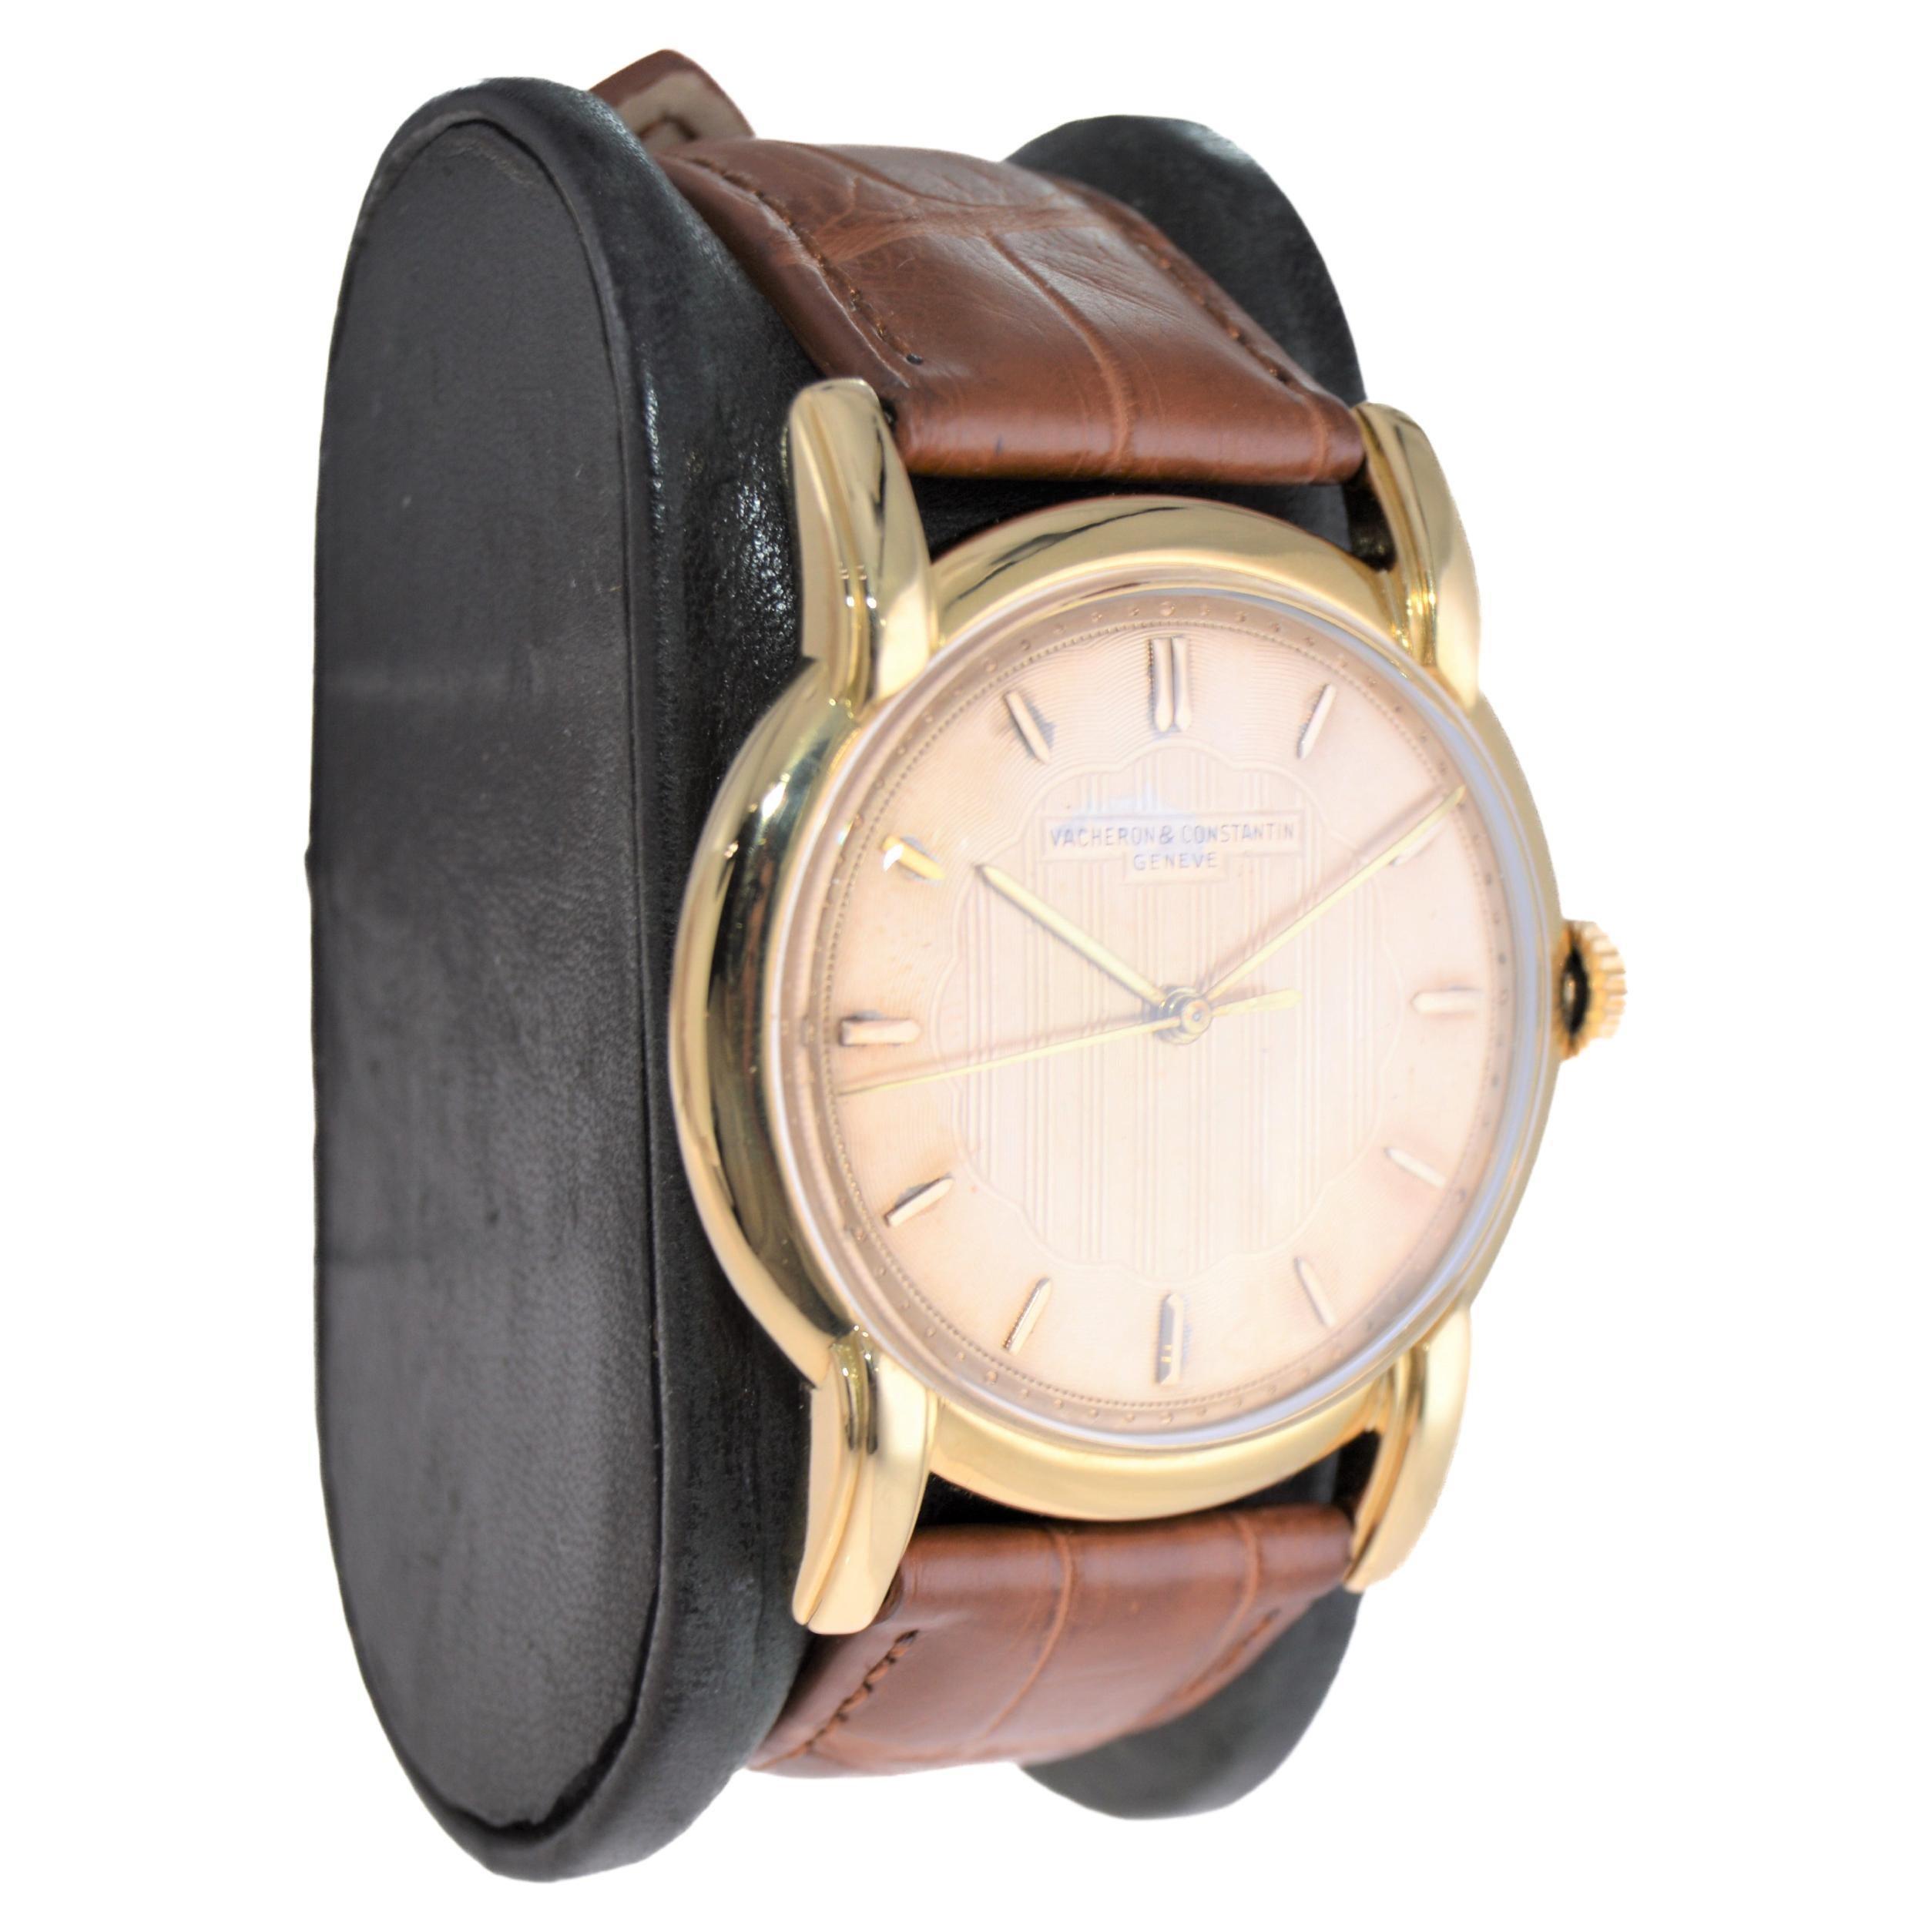 FACTORY / HOUSE: Vacheron Constantin
STYLE / REFERENCE: Art Deco / Dress Style 
METAL / MATERIAL: 18Kt. Yellow Gold
CIRCA / YEAR: 1940's
DIMENSIONS / SIZE: 46mm Length X 38mm Diameter
MOVEMENT / CALIBER: Manual Winding / 17 Jewels / Caliber